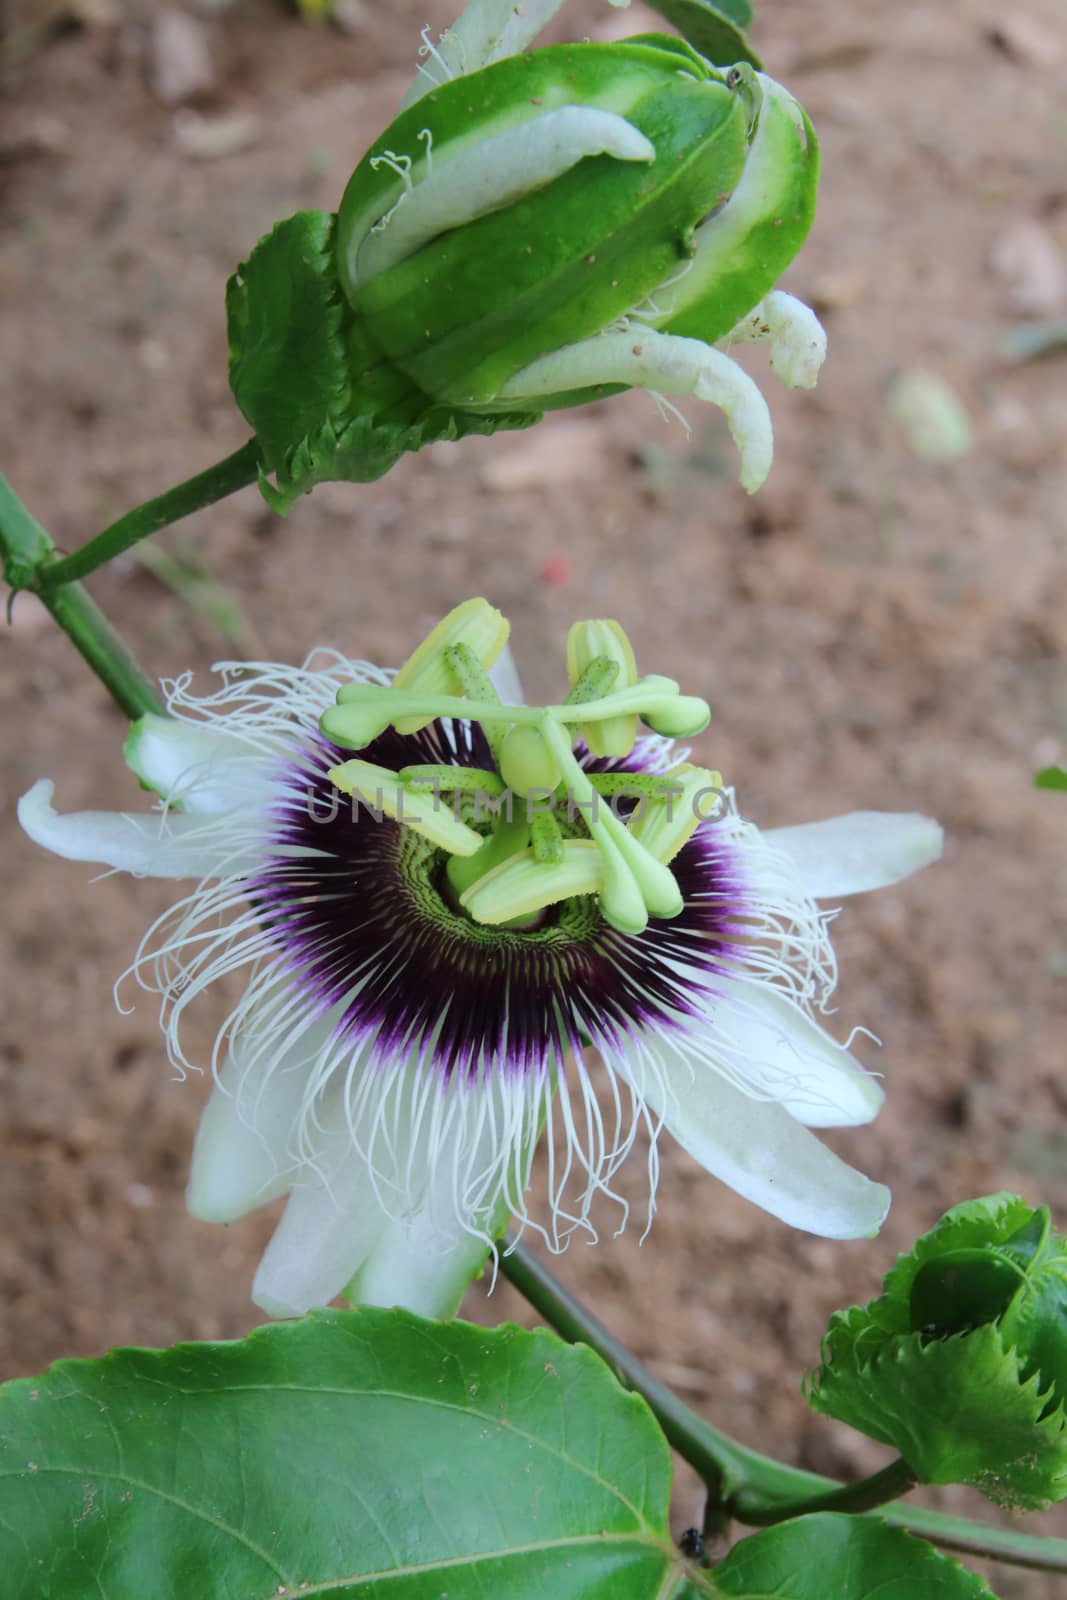 The flower of passion fruit is blooming.The stem and flower are longer than the petals ,wide circles out with purple stripes white.